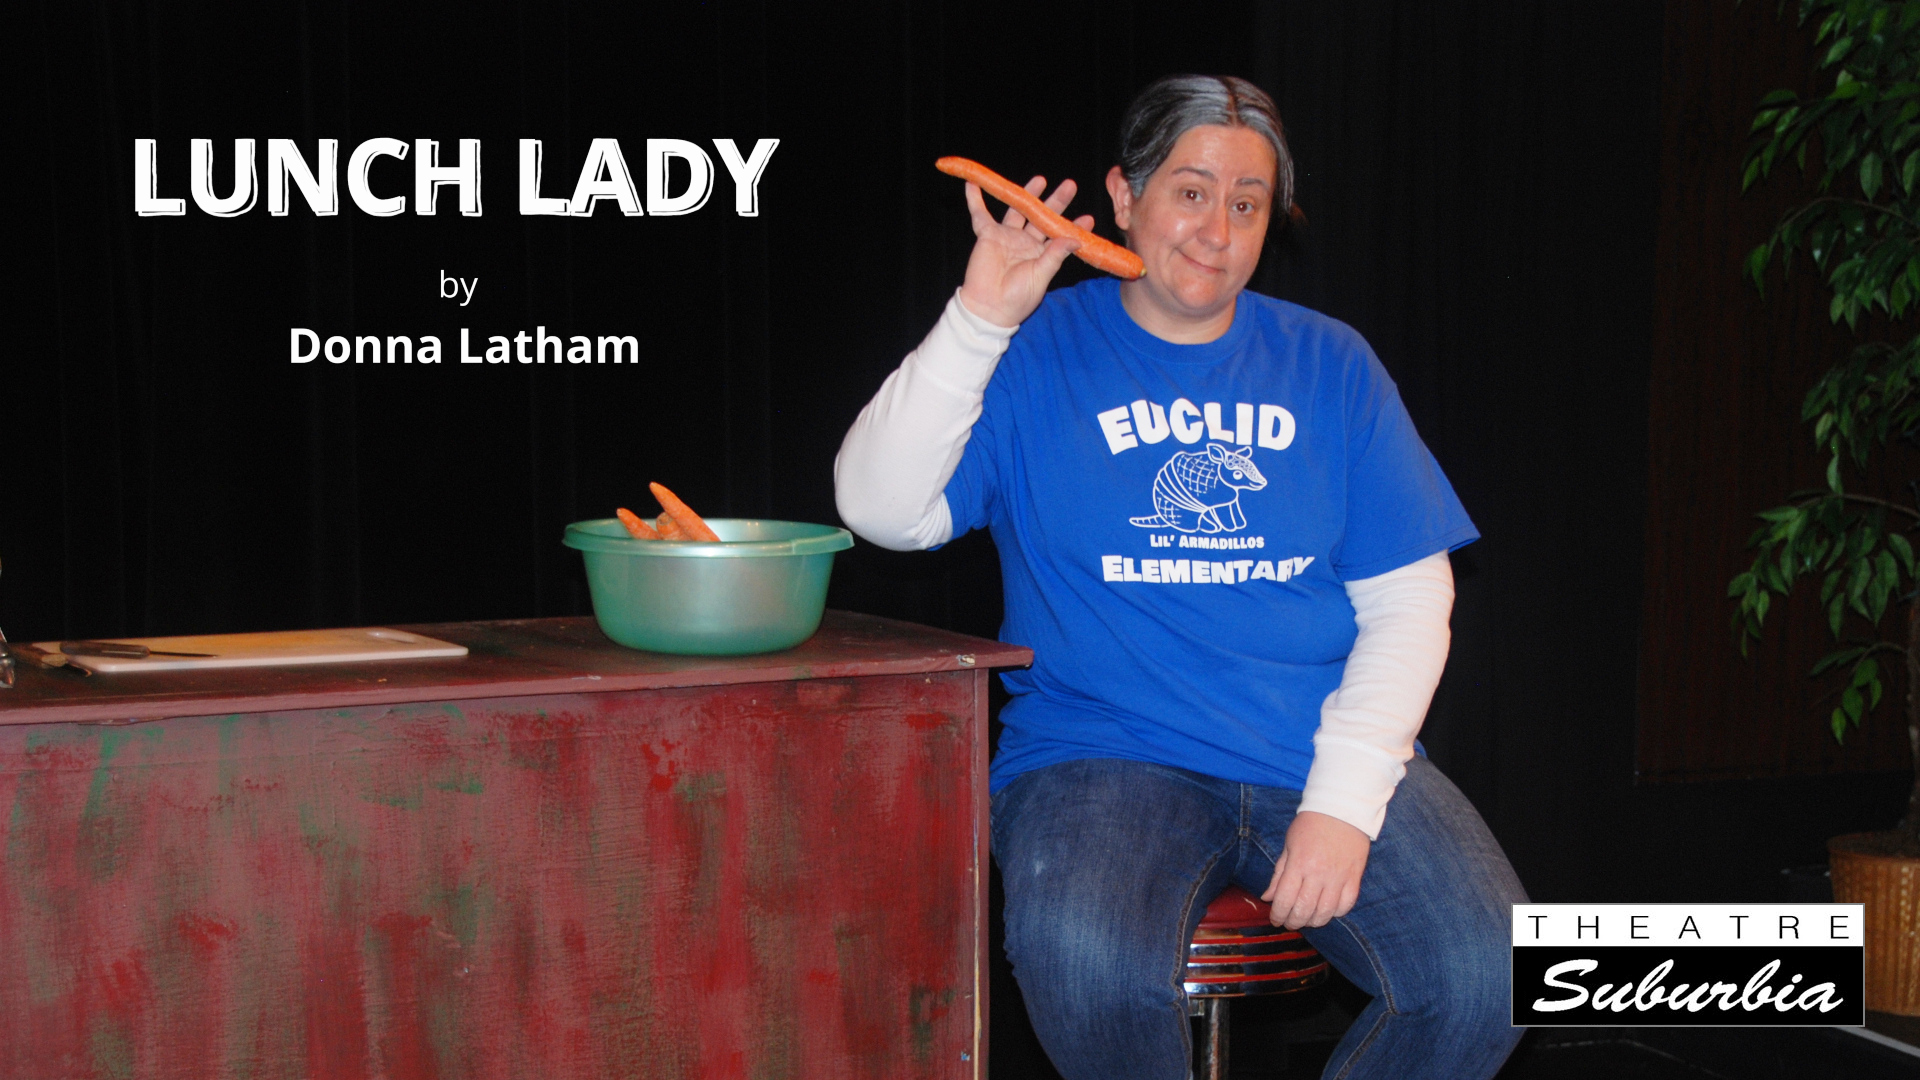 Lunch Lady by Donna Latham